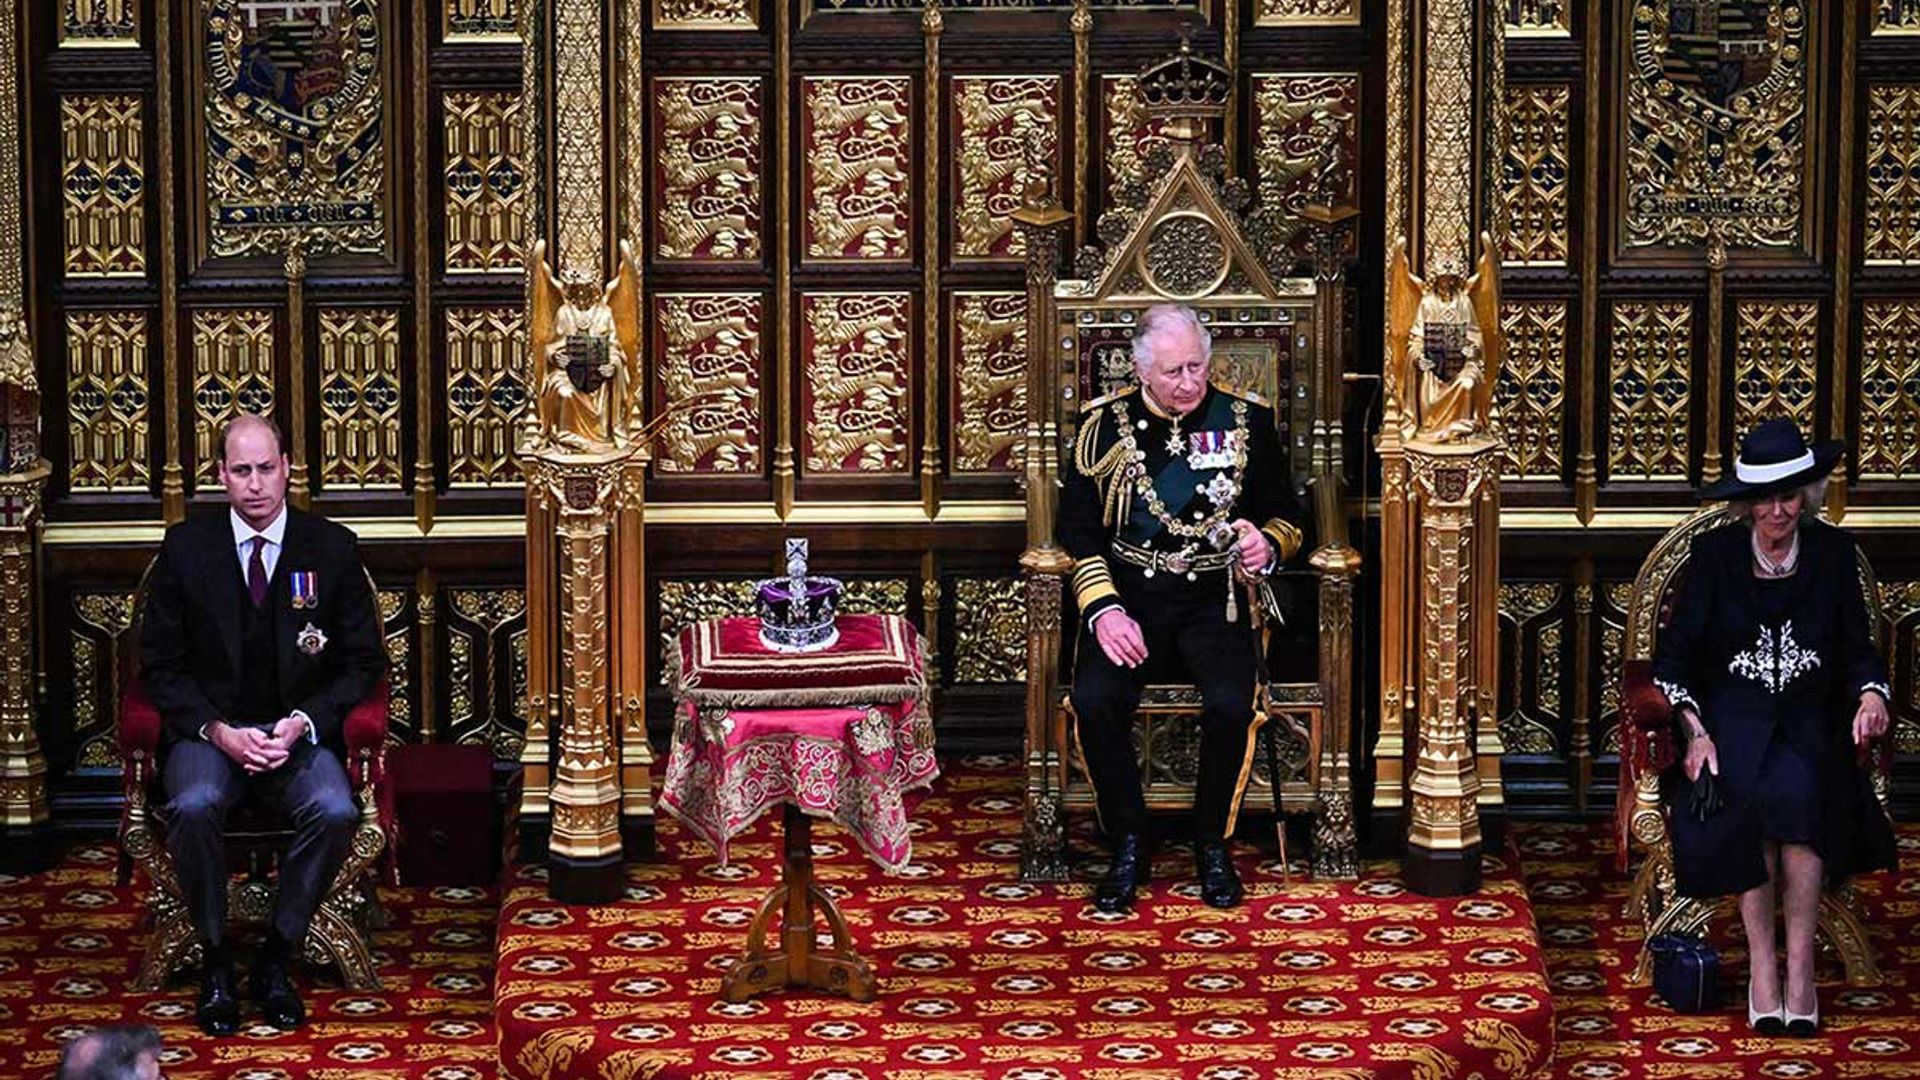 Prince Charles joined by Prince William at State Opening of Parliament as the Queen watches from home